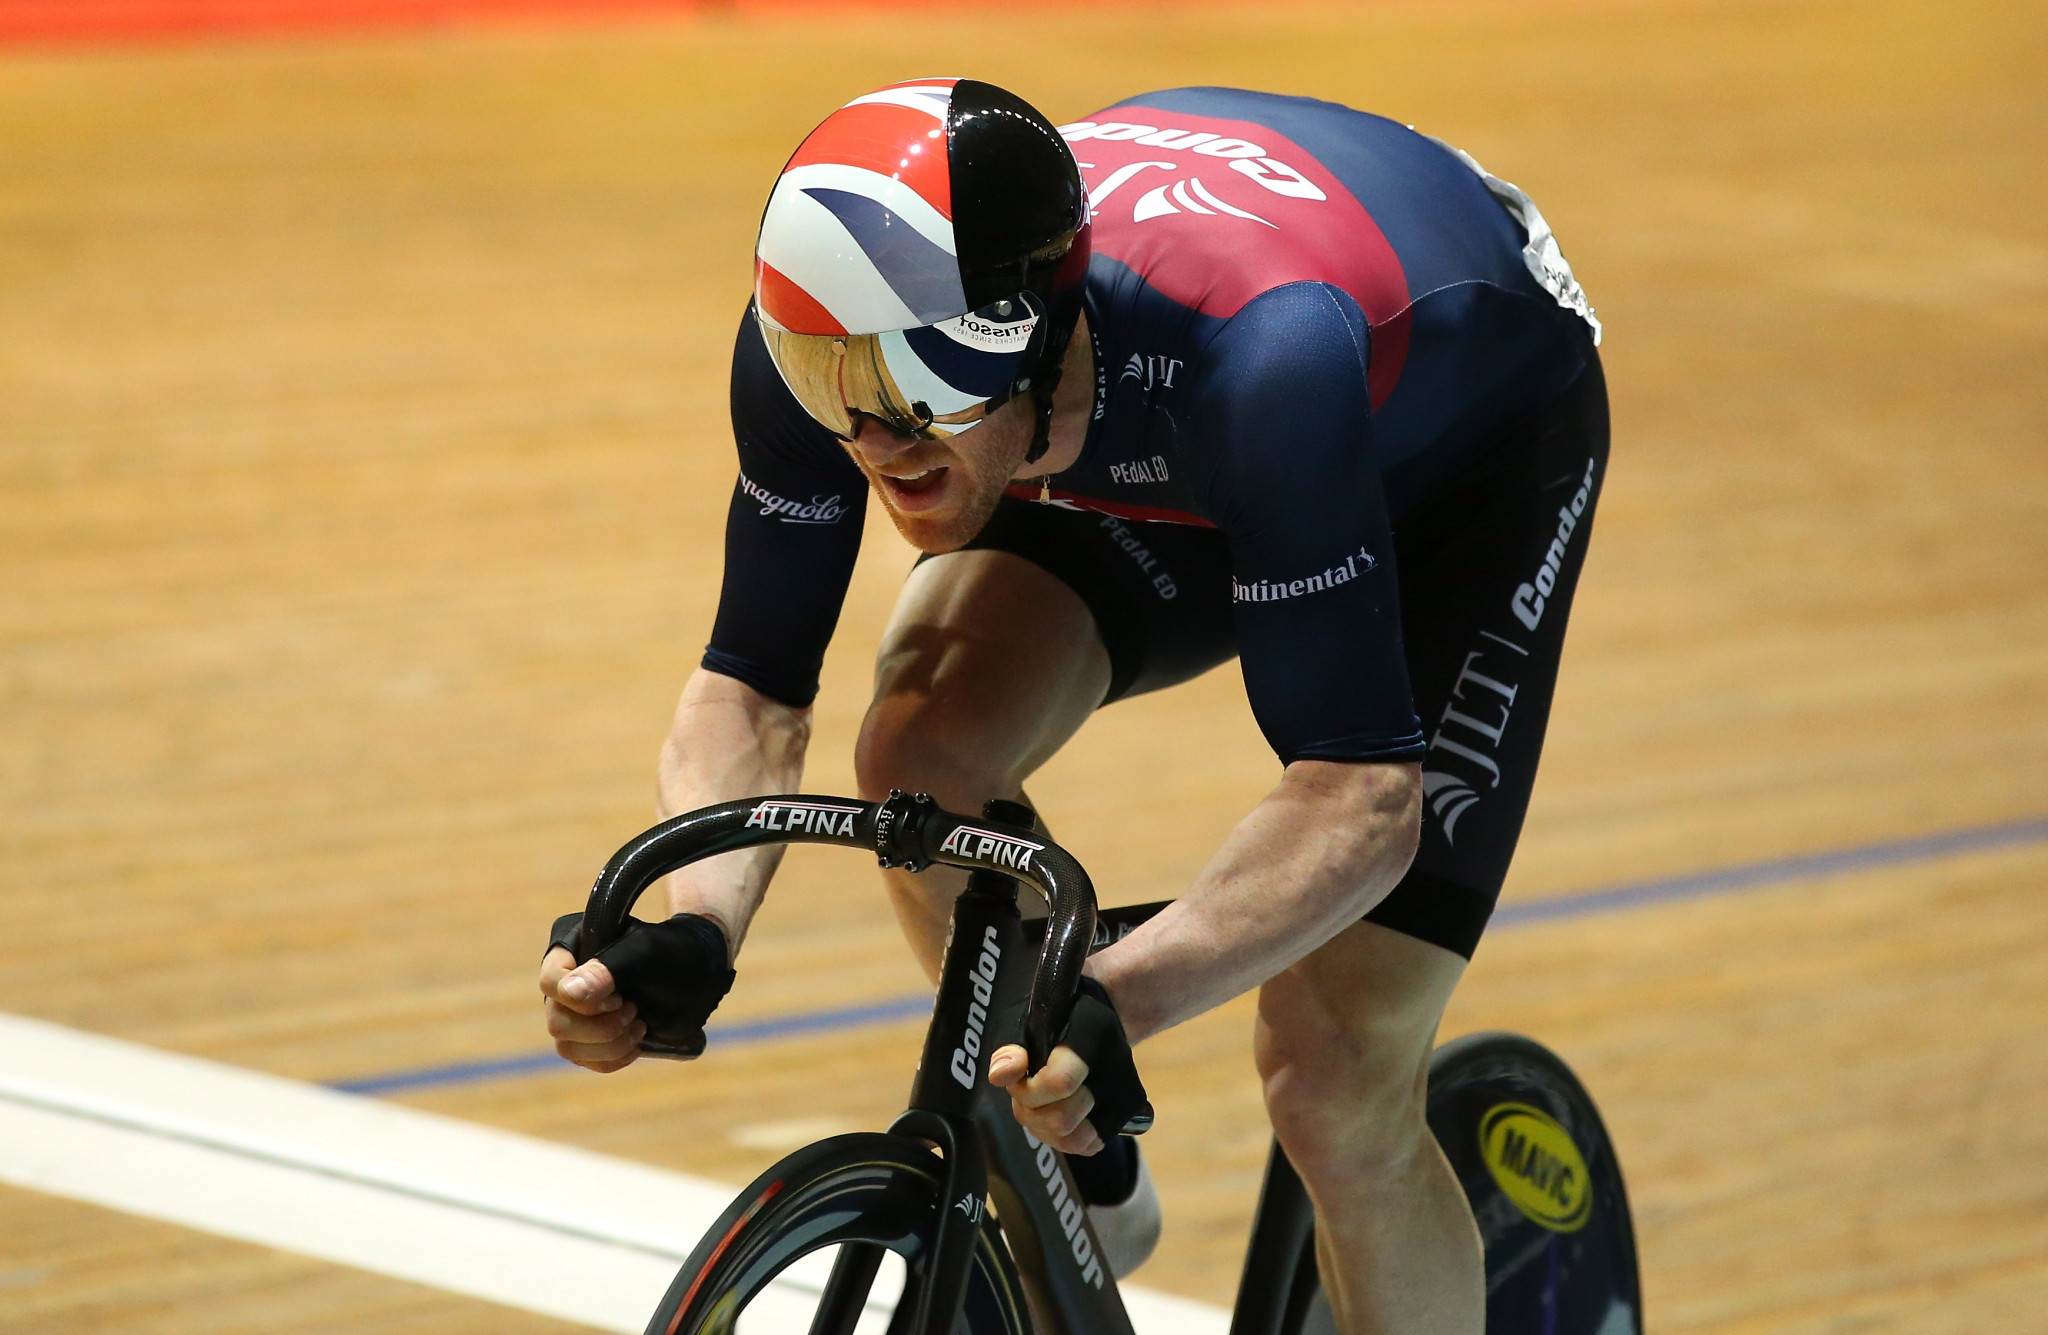 Britain team to beat with 2018-2019 UCI Track Cycling World Cup set to begin